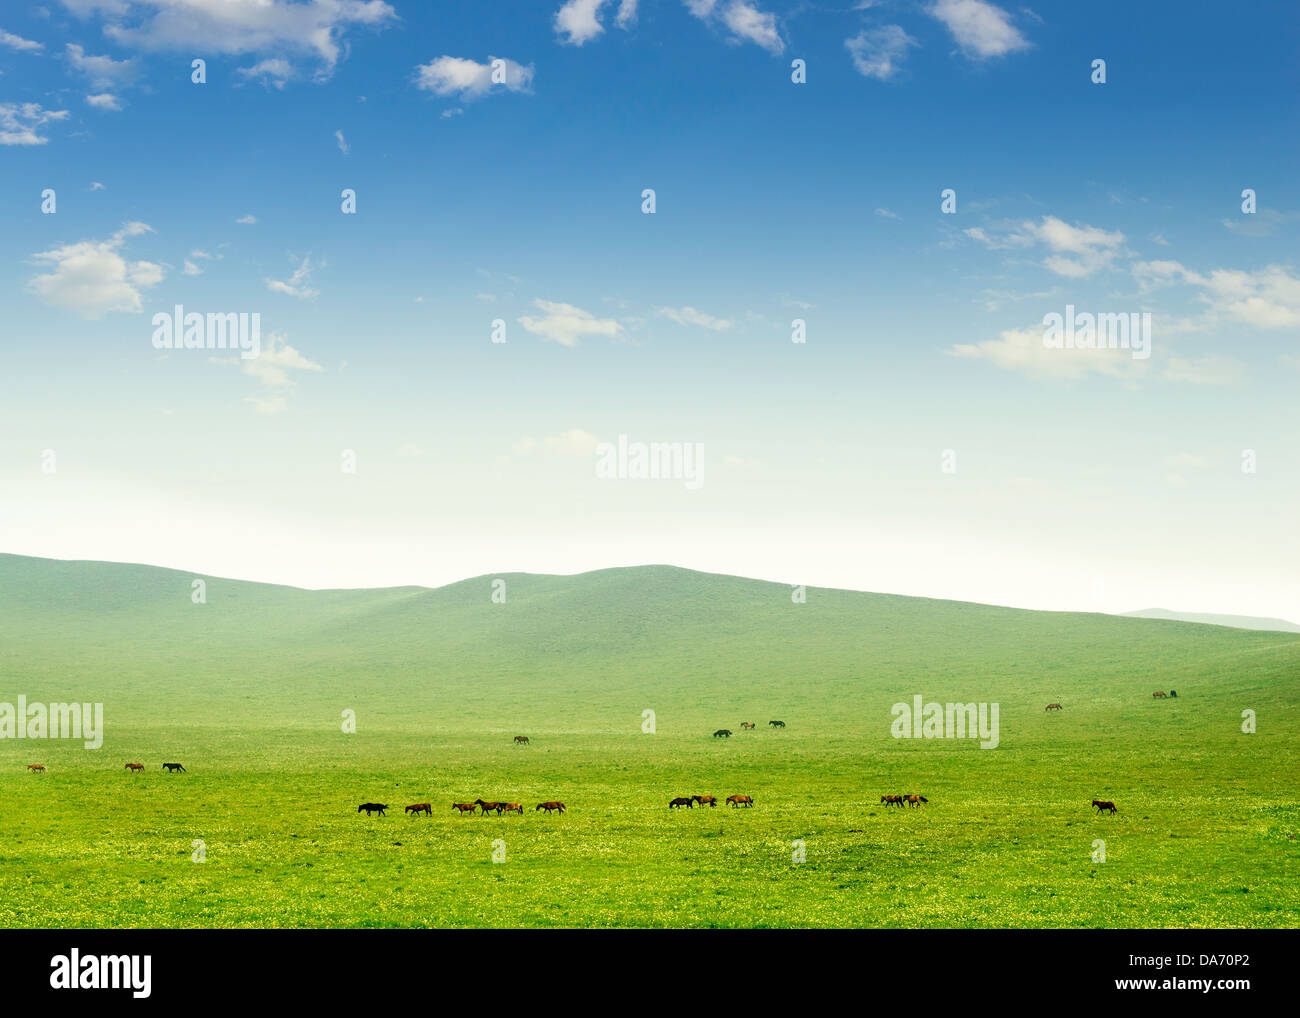 Fresh spring green grass with blue sky and wood floor background Stock Photo